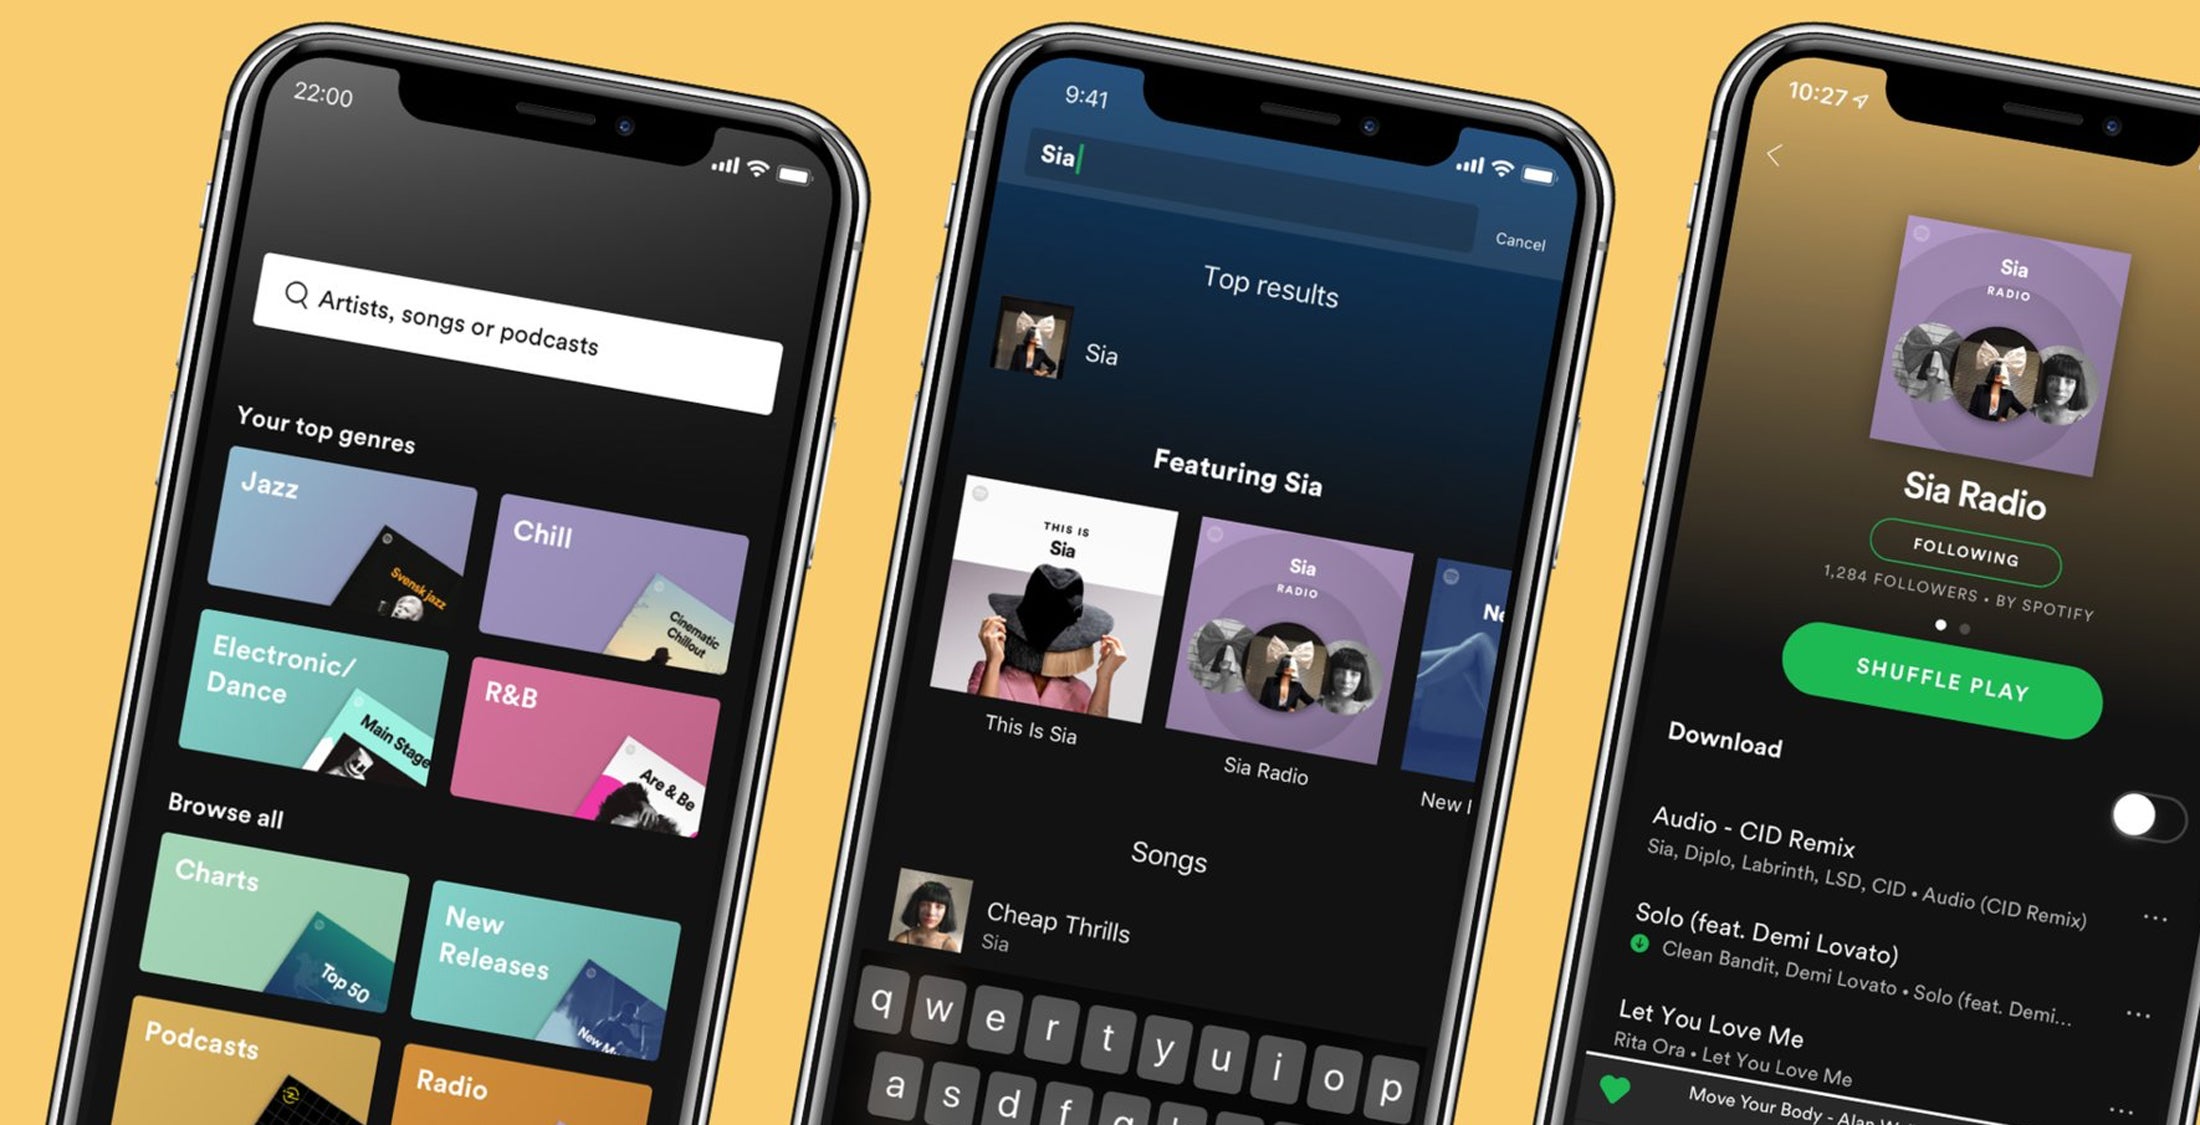 Spotify third party app